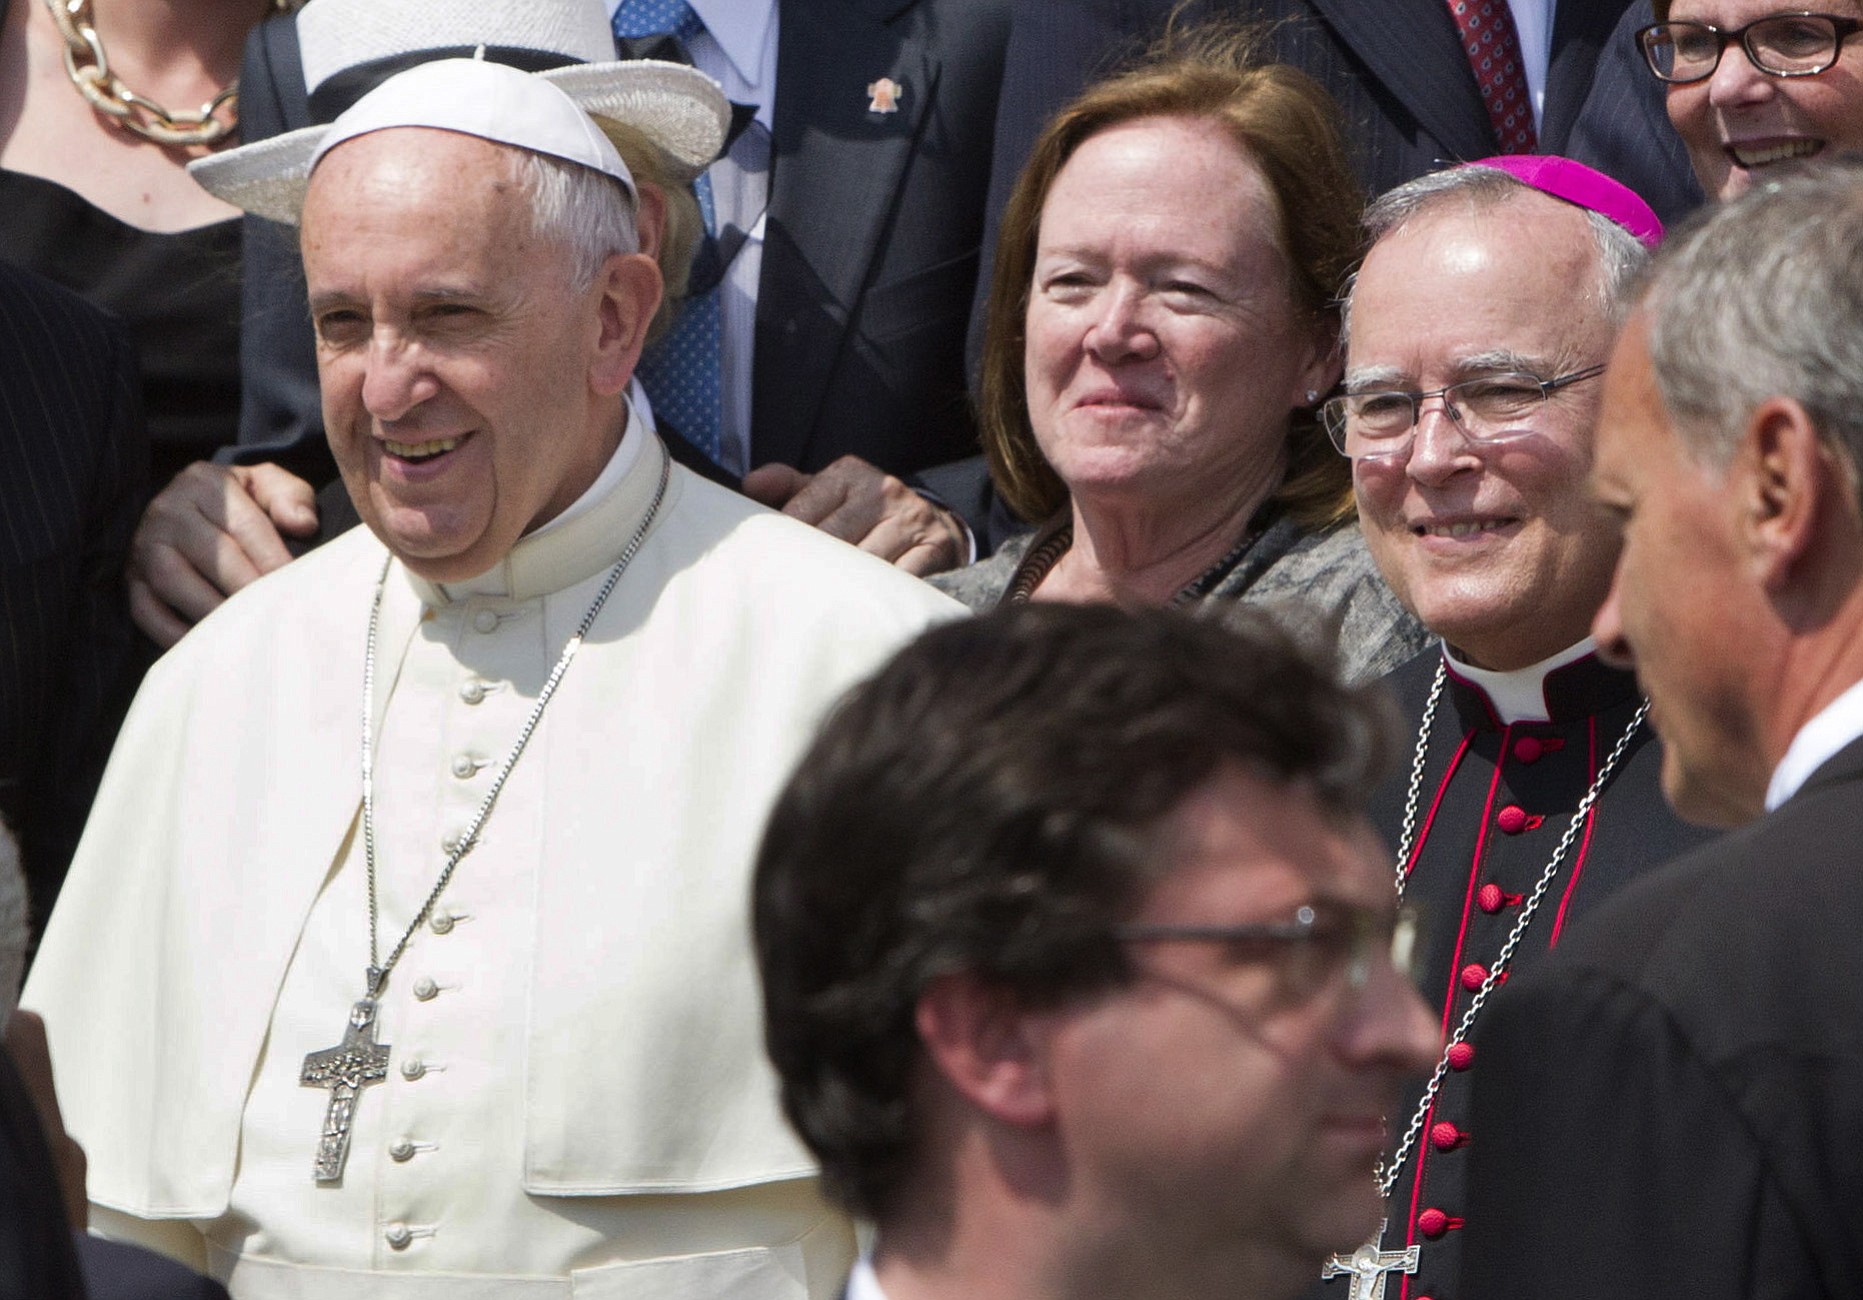 Philadelphia's Archbishop Charles Chaput, right, stands next to Pope Francis as they pose for a photo with a delegation from Philadelphia at the end of the pontiff's weekly general audience in St.